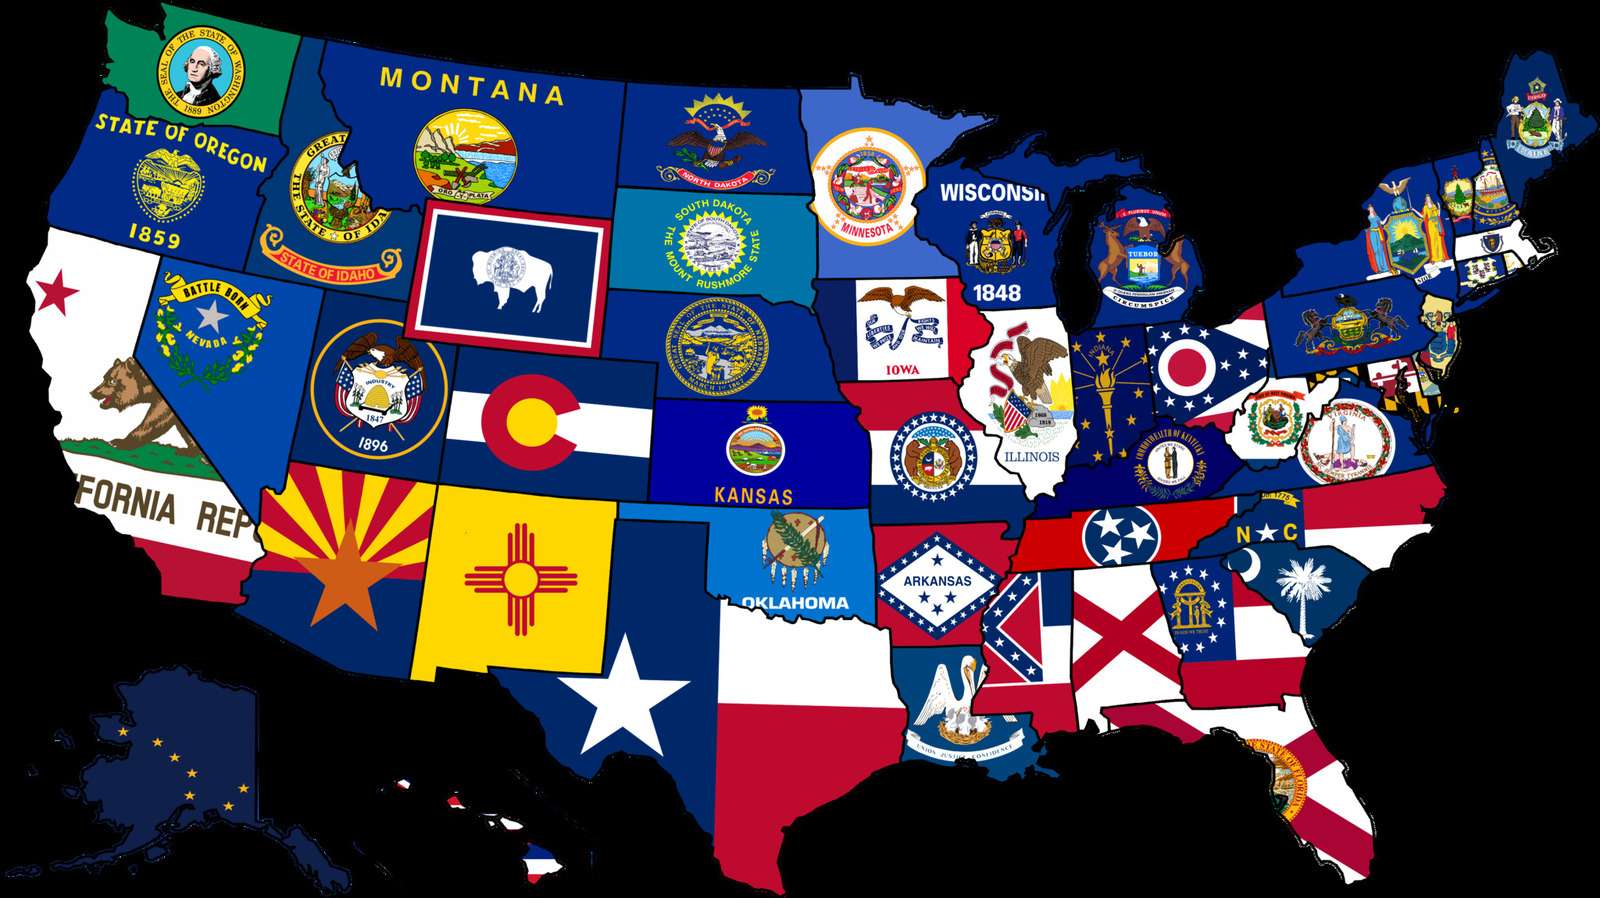 all state flags on united states map